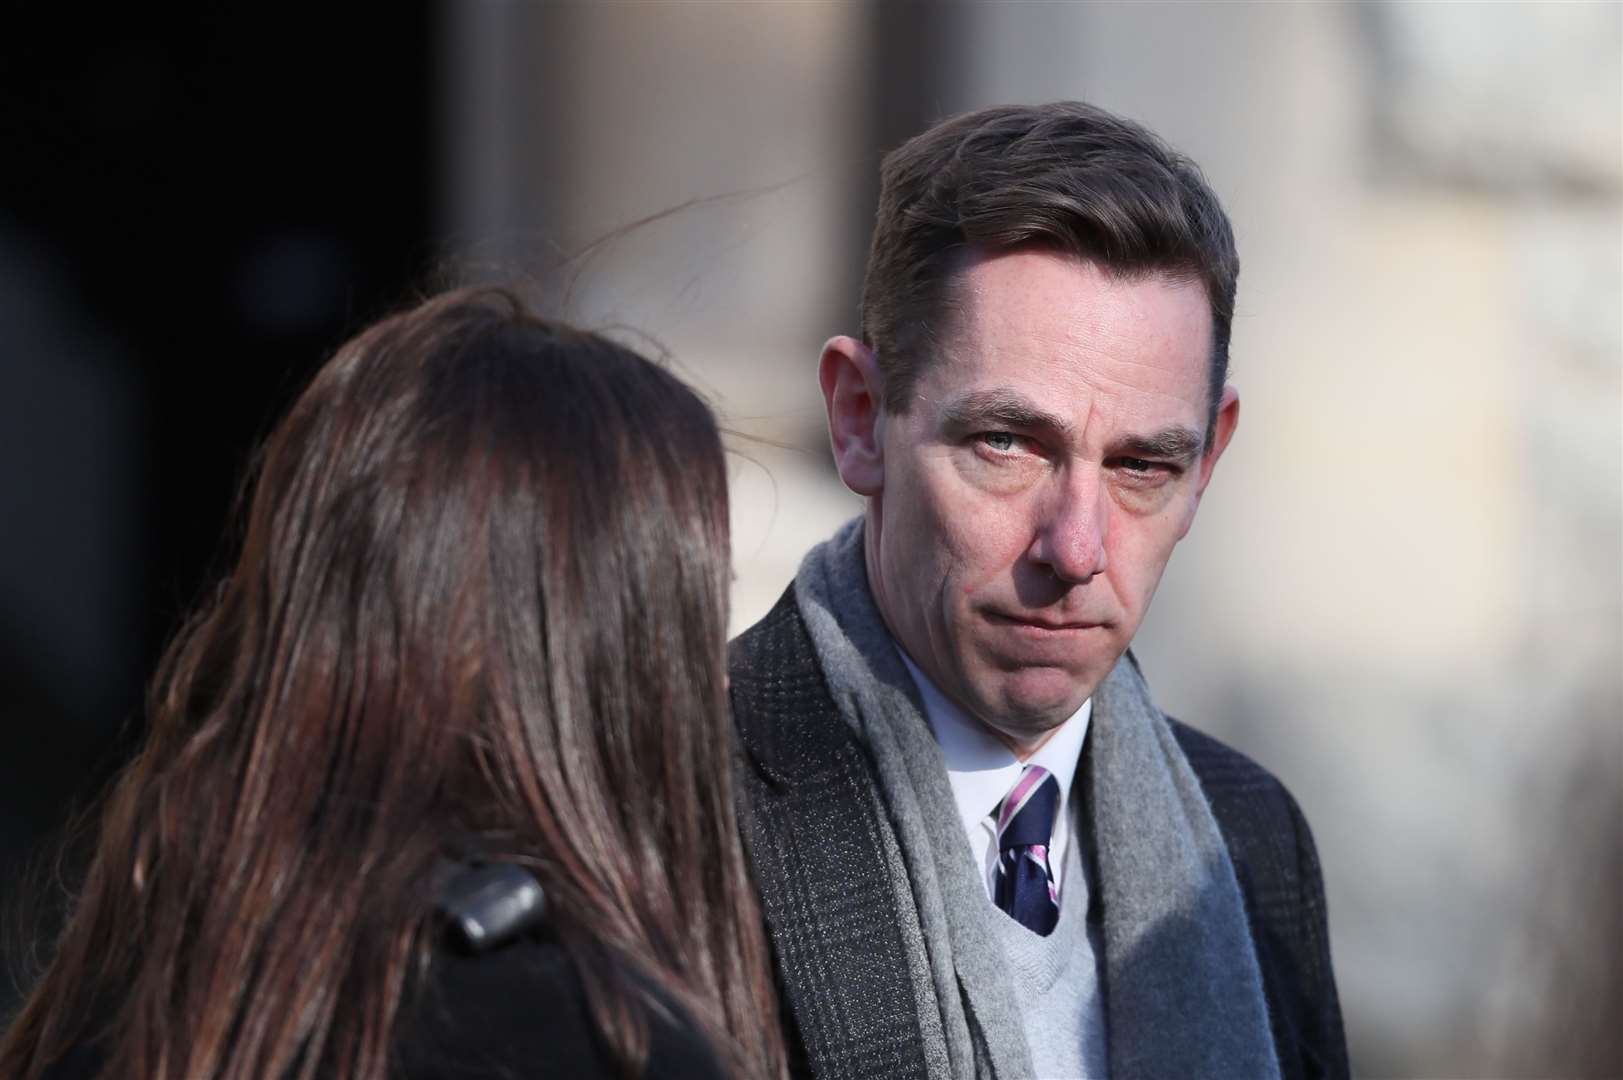 RTE presenter Ryan Tubridy received undeclared payments (Brian Lawless/PA)